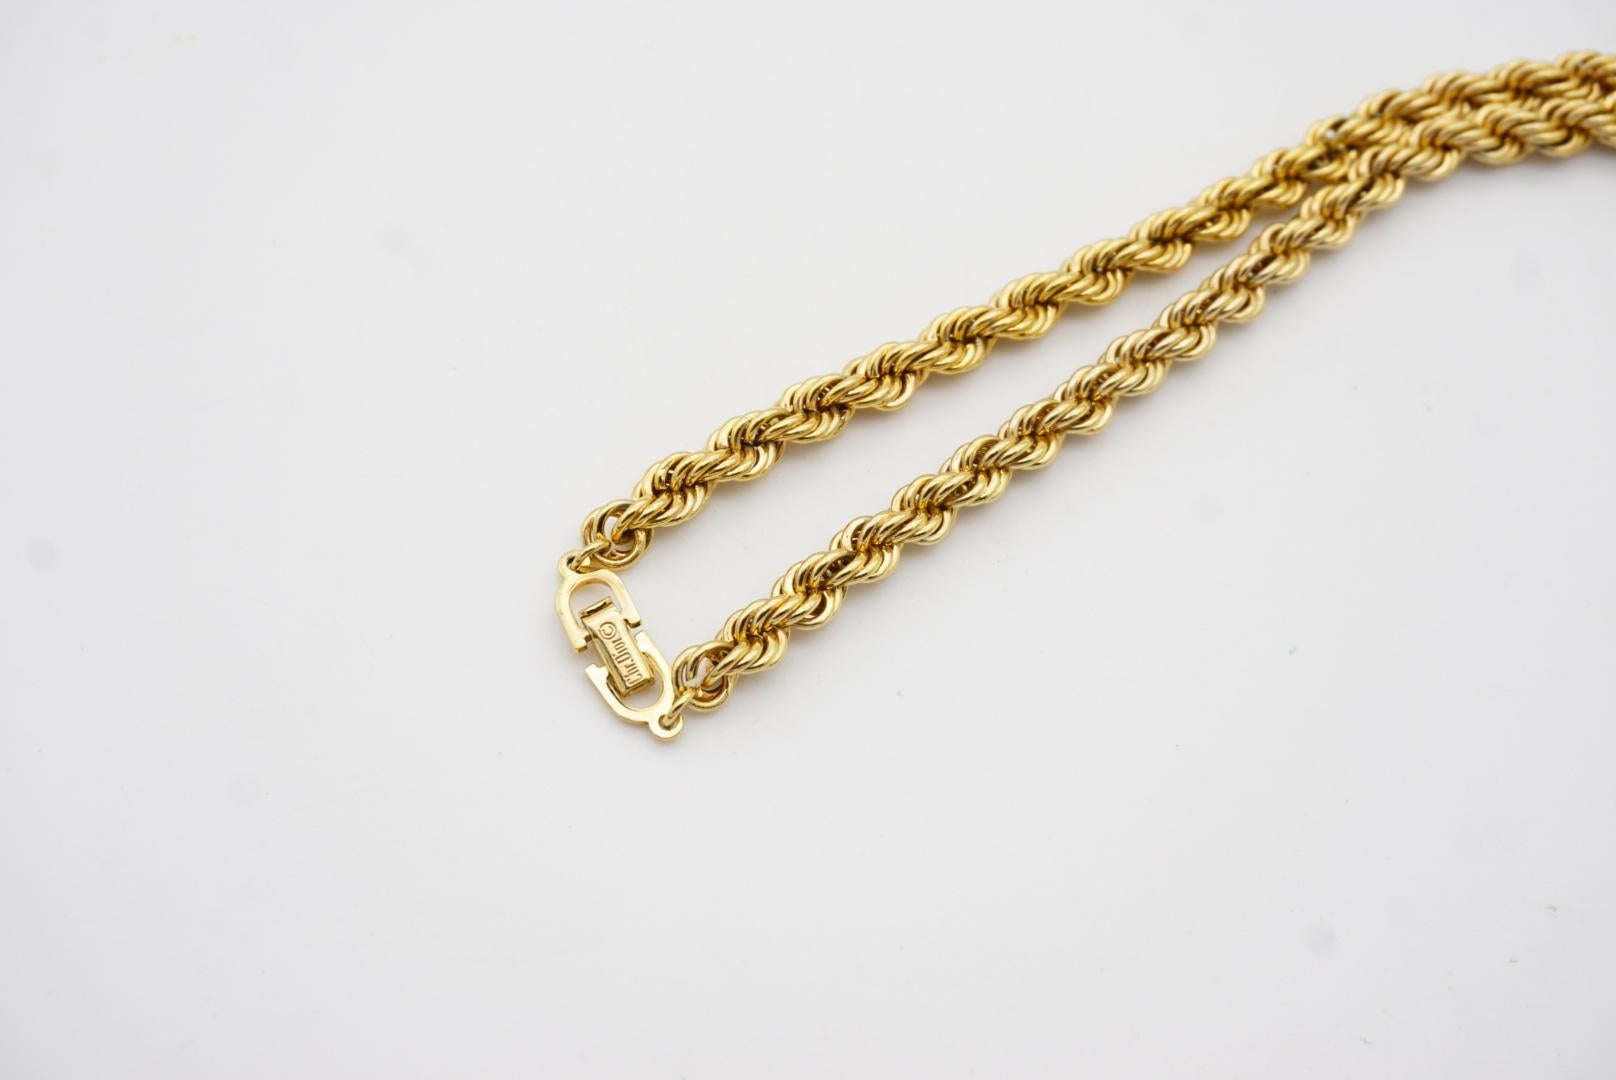 Christian Dior Vintage 1980s Versatile Twist Rope Chain Gold Long Necklace For Sale 8